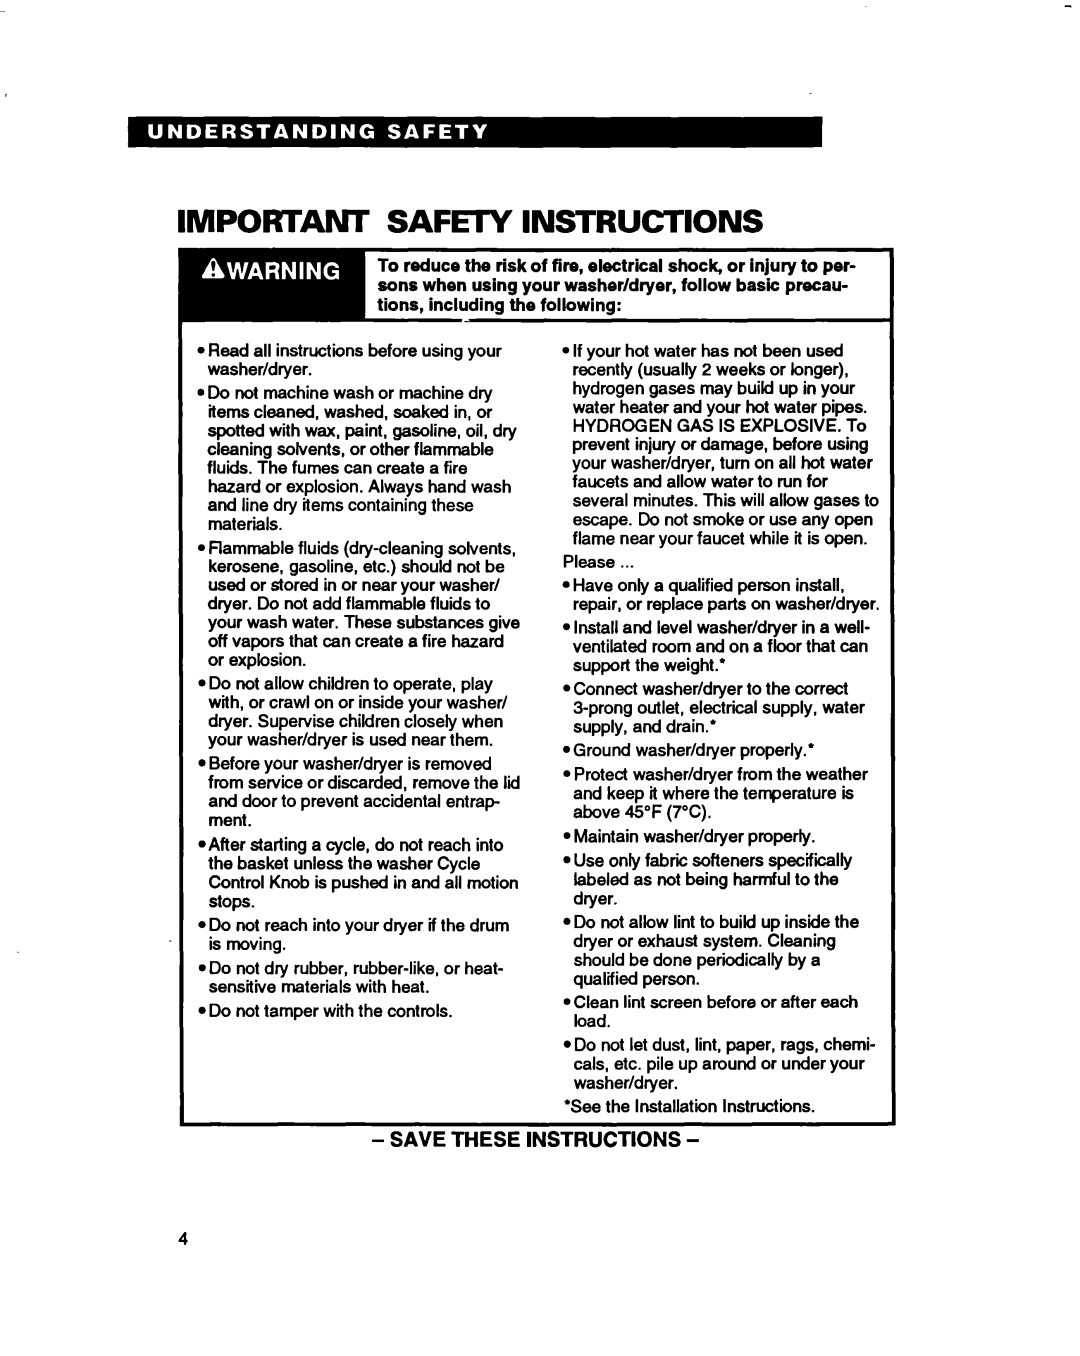 Whirlpool 3396314 warranty Impofwant Safei-Y Instructions, Save These Instructions 